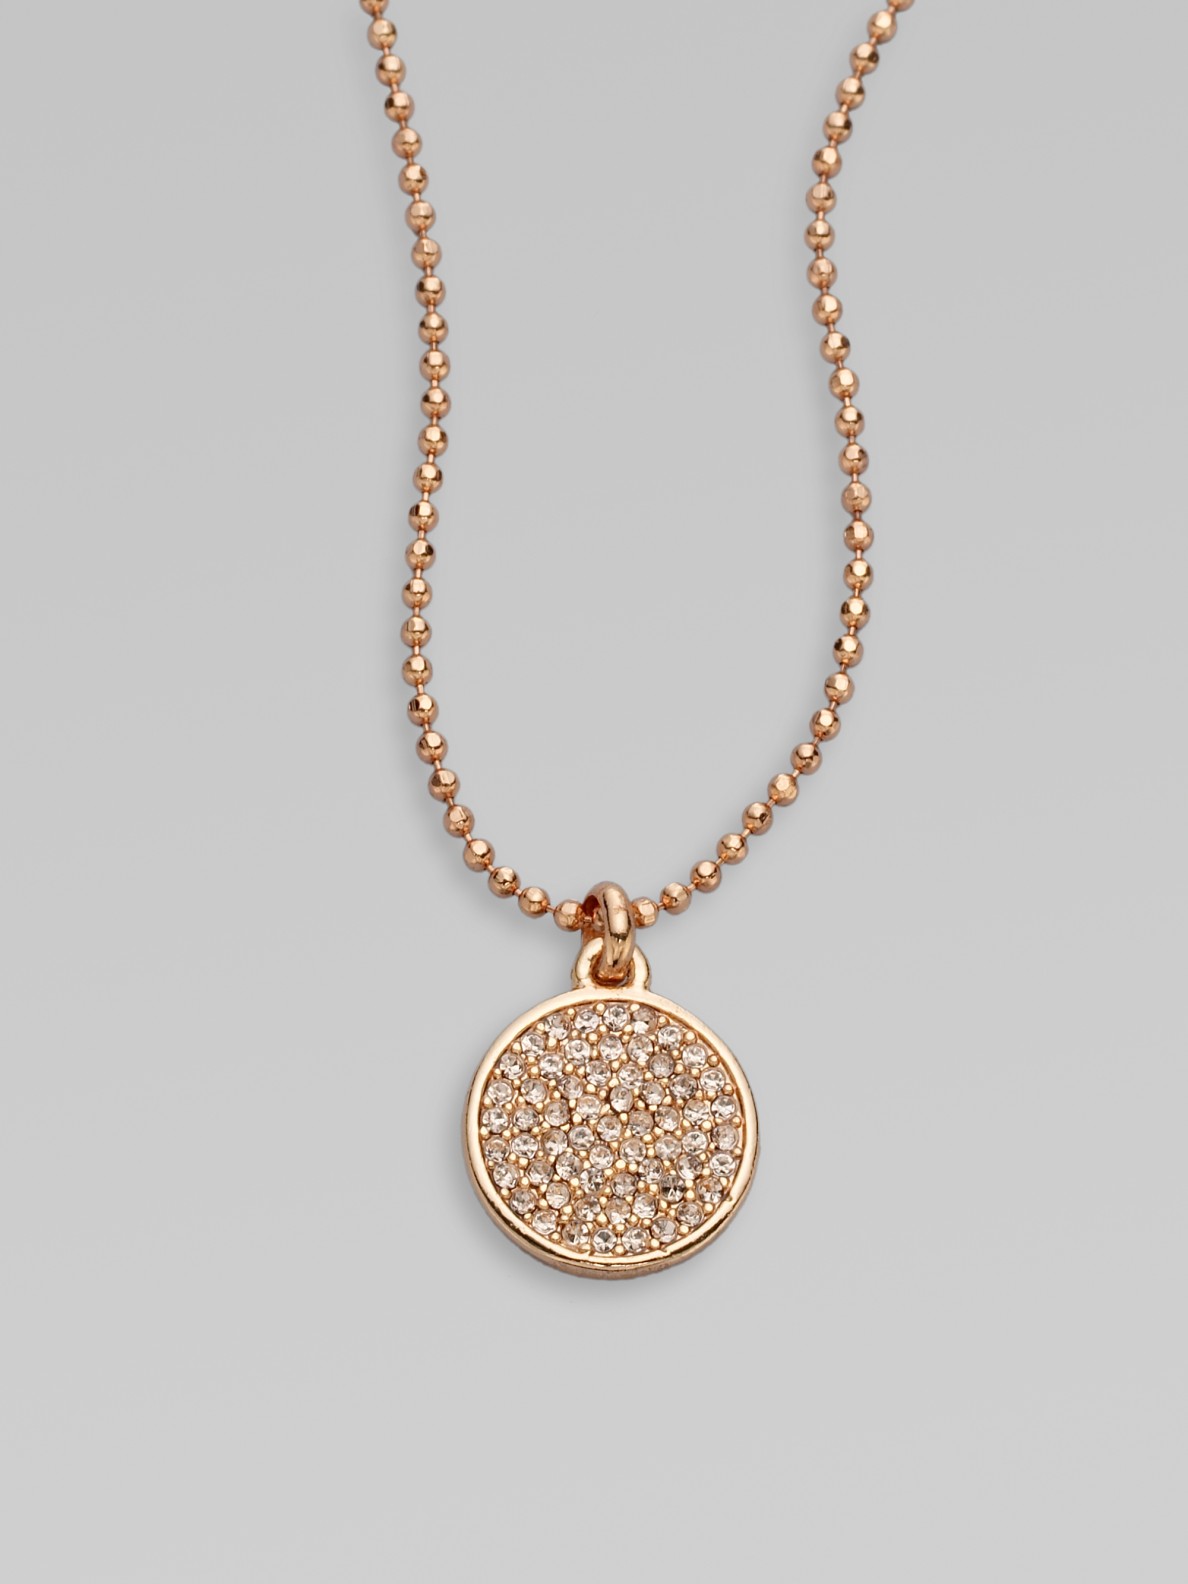 Lyst - Michael kors Pave Fireball Necklace, Rose Gold in Pink